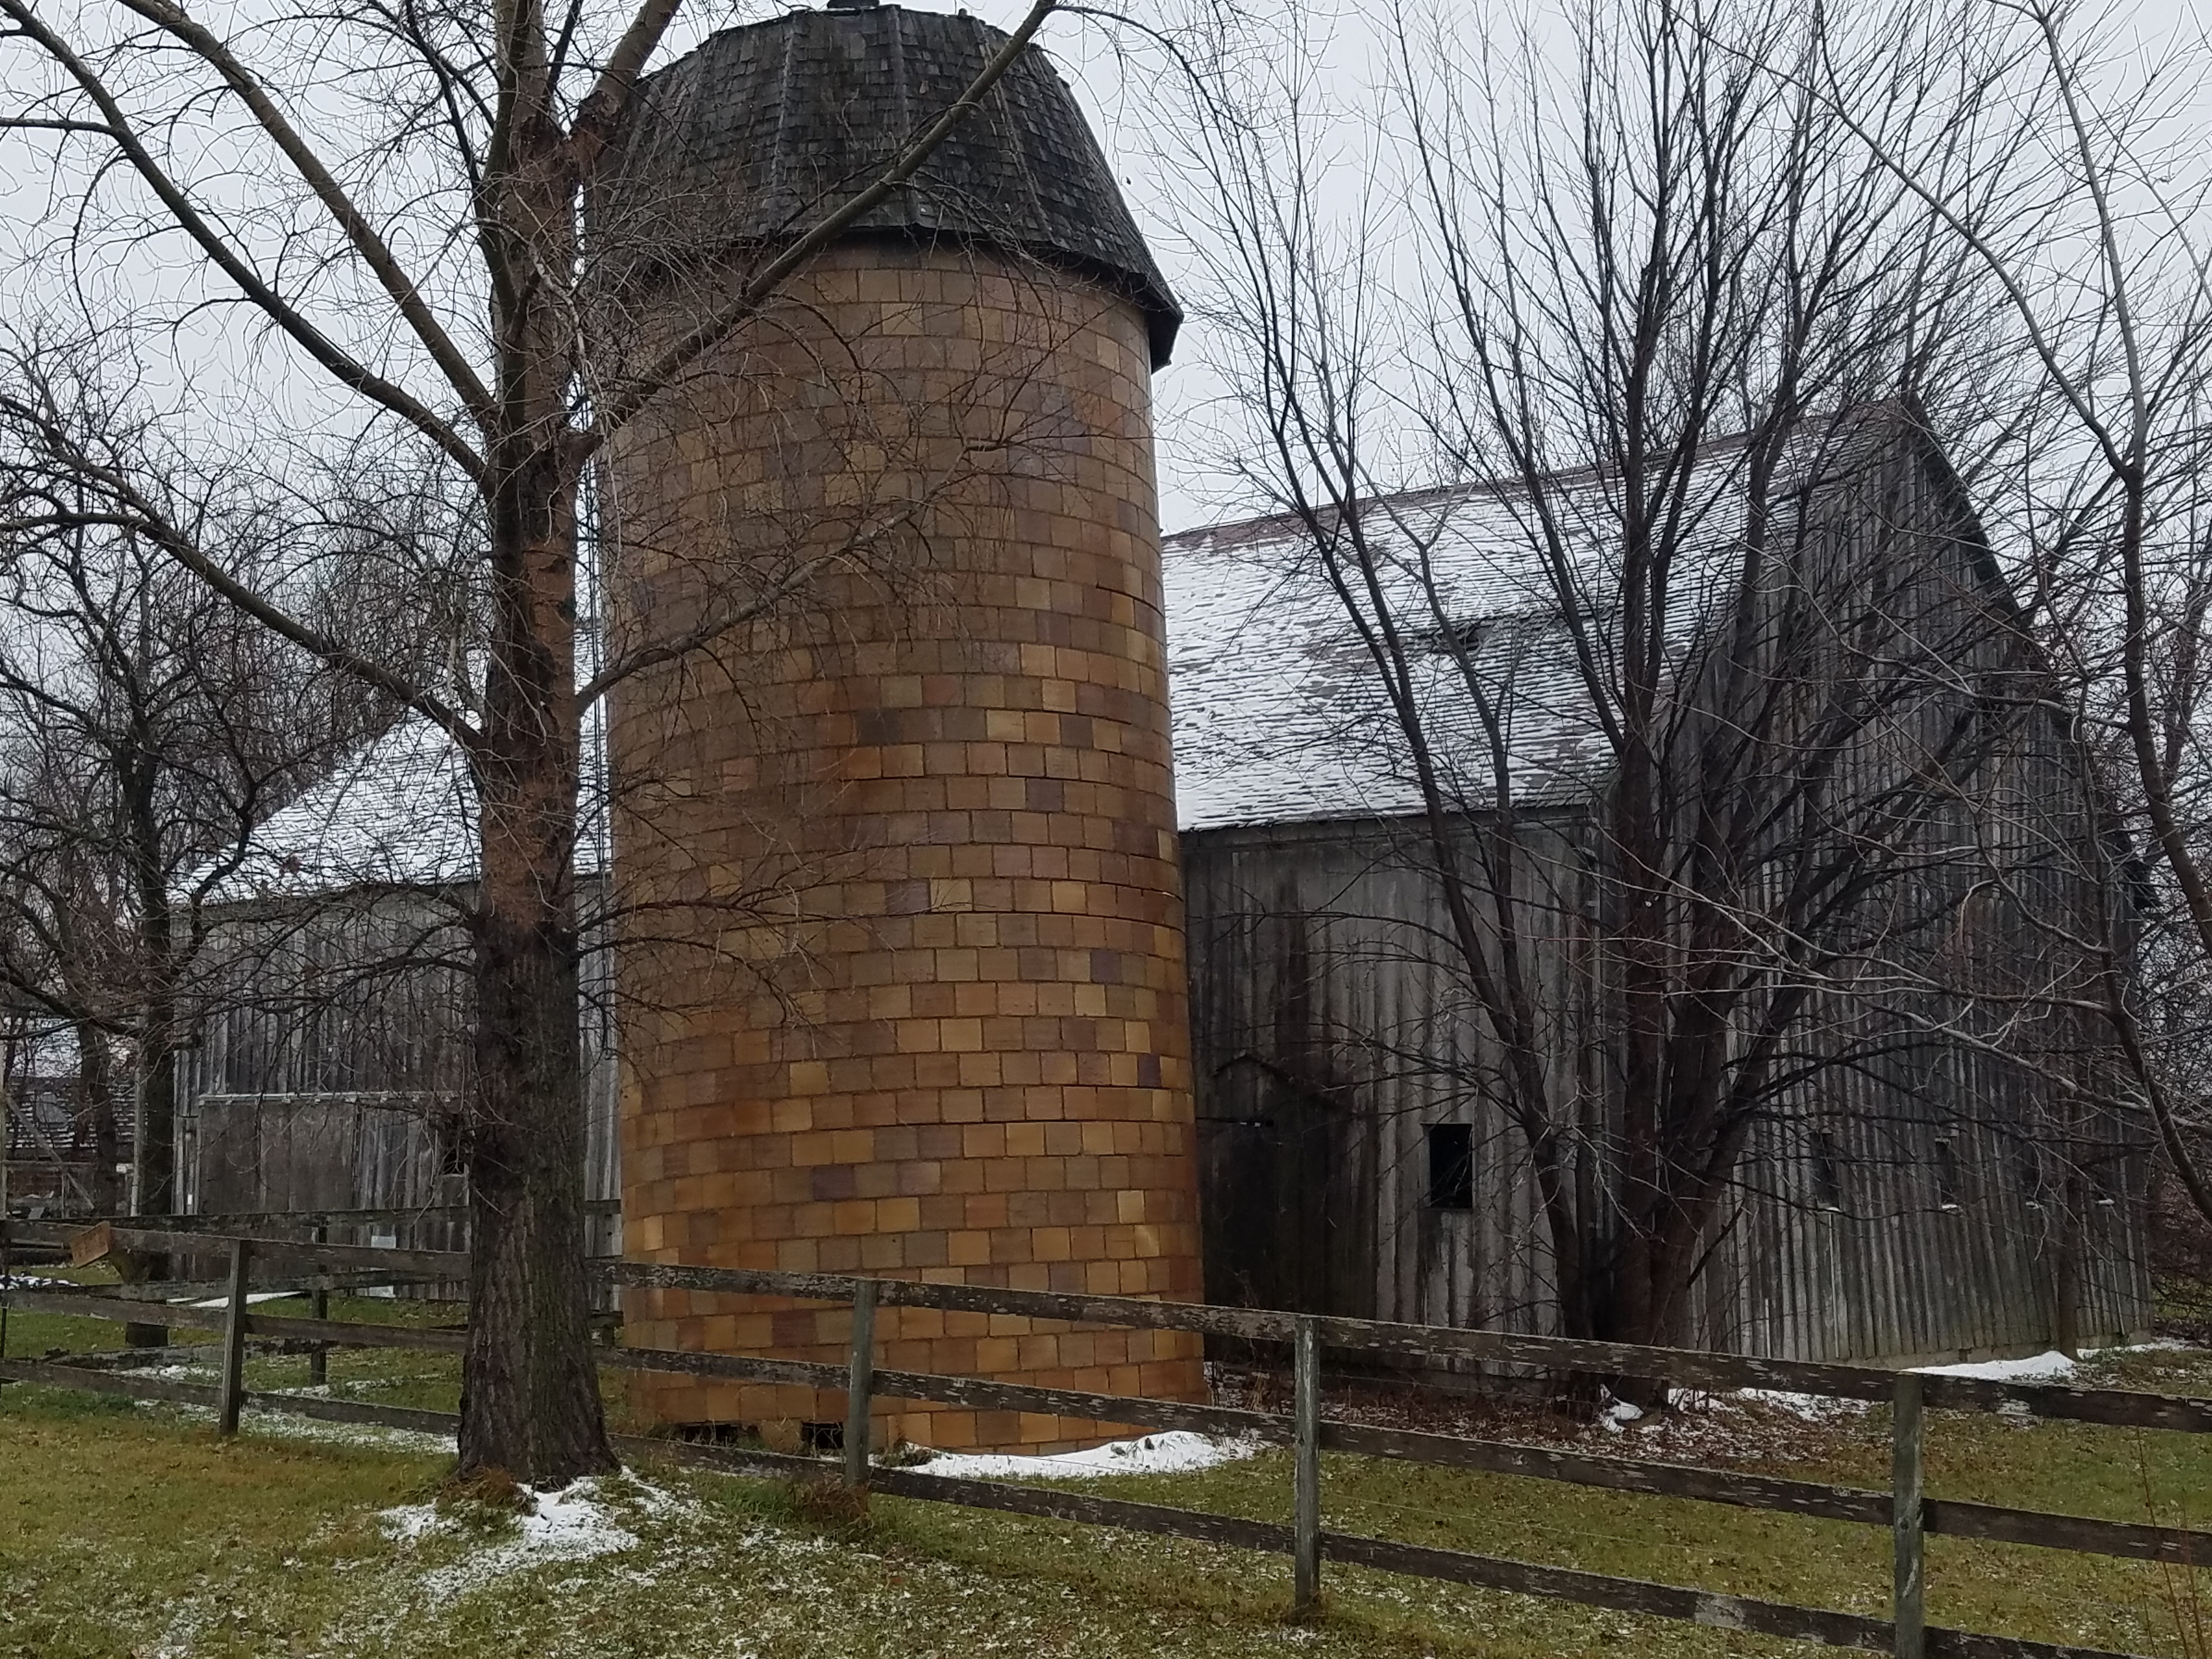 barn-with-a-dusting-of-snow-339.jpg